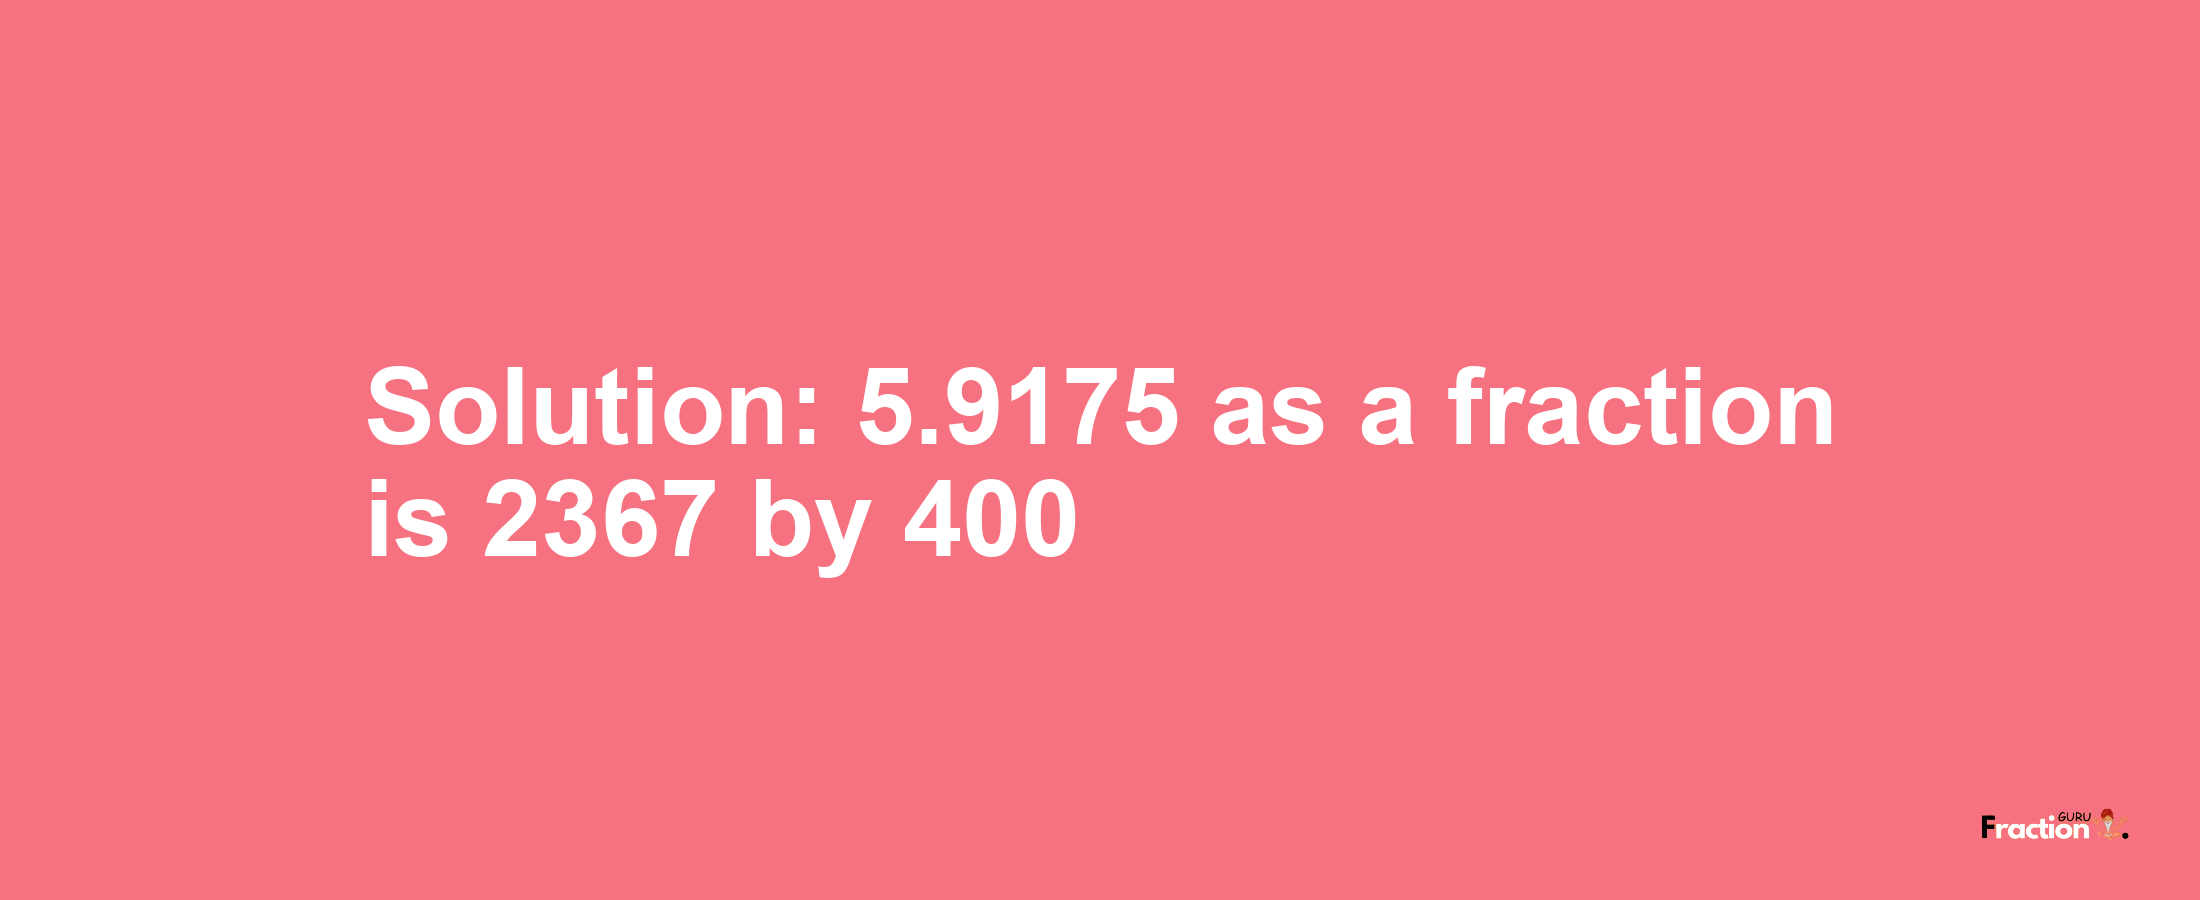 Solution:5.9175 as a fraction is 2367/400